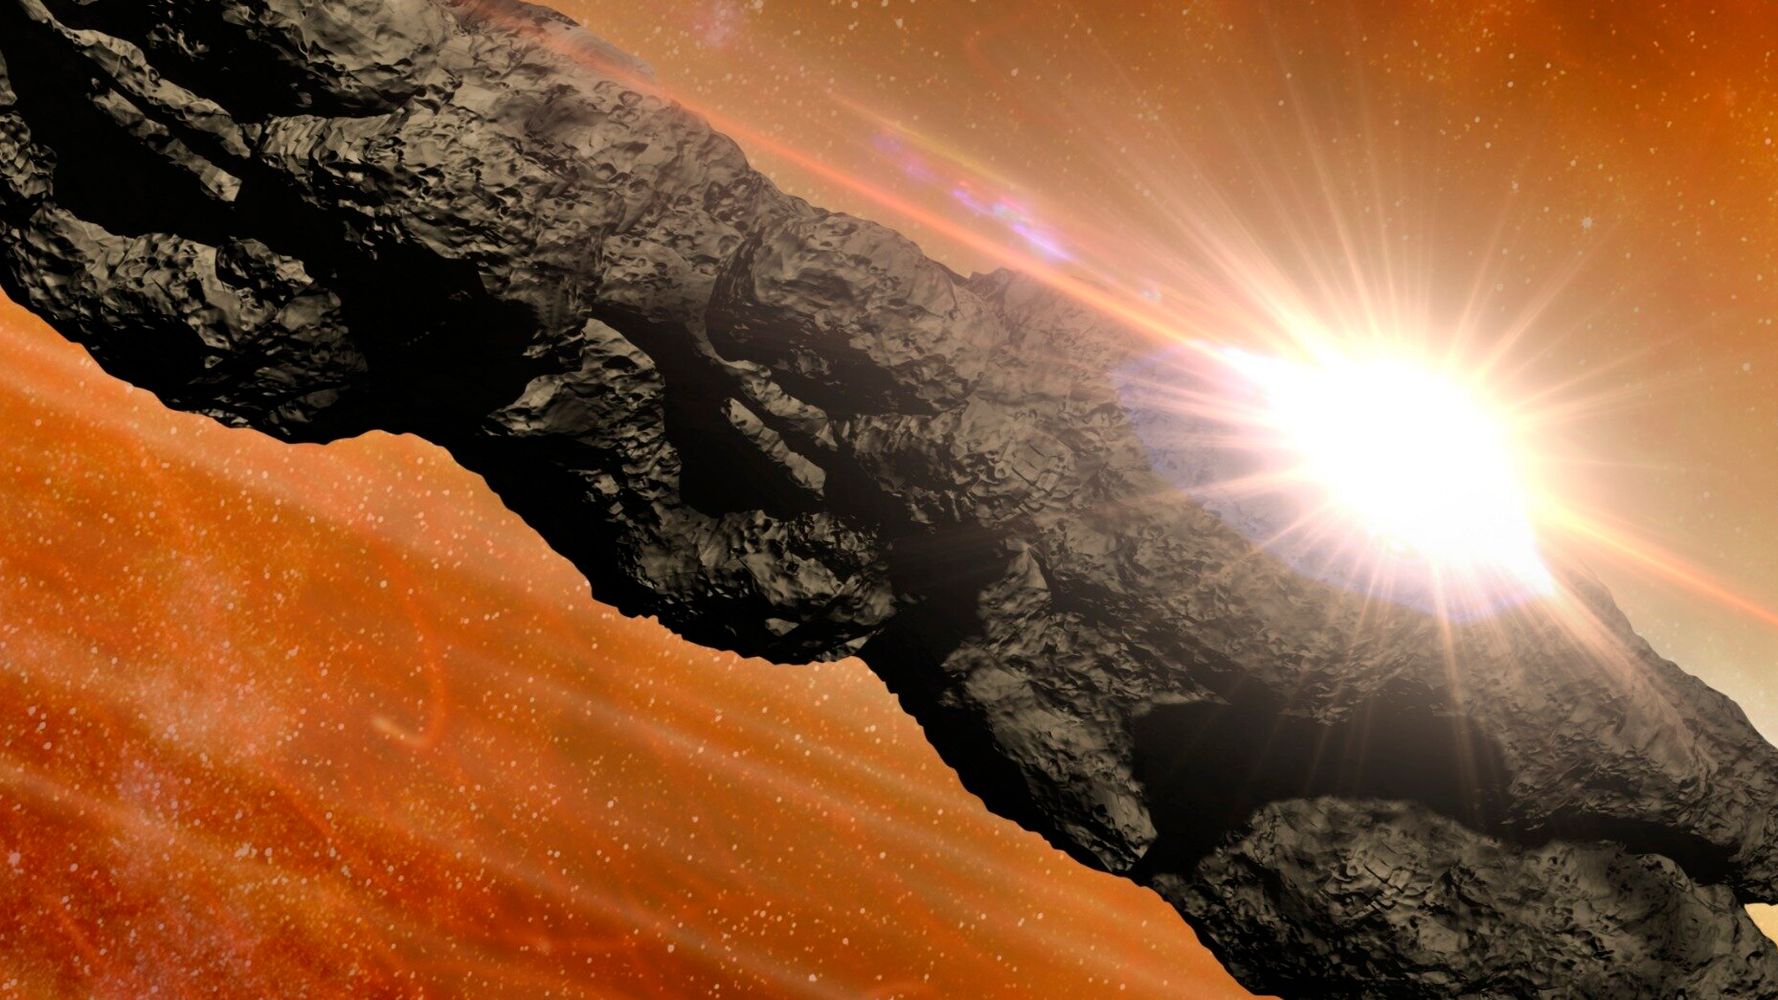 Solar System’s first known interstellar visitor probably a cookie-shaped planet shard